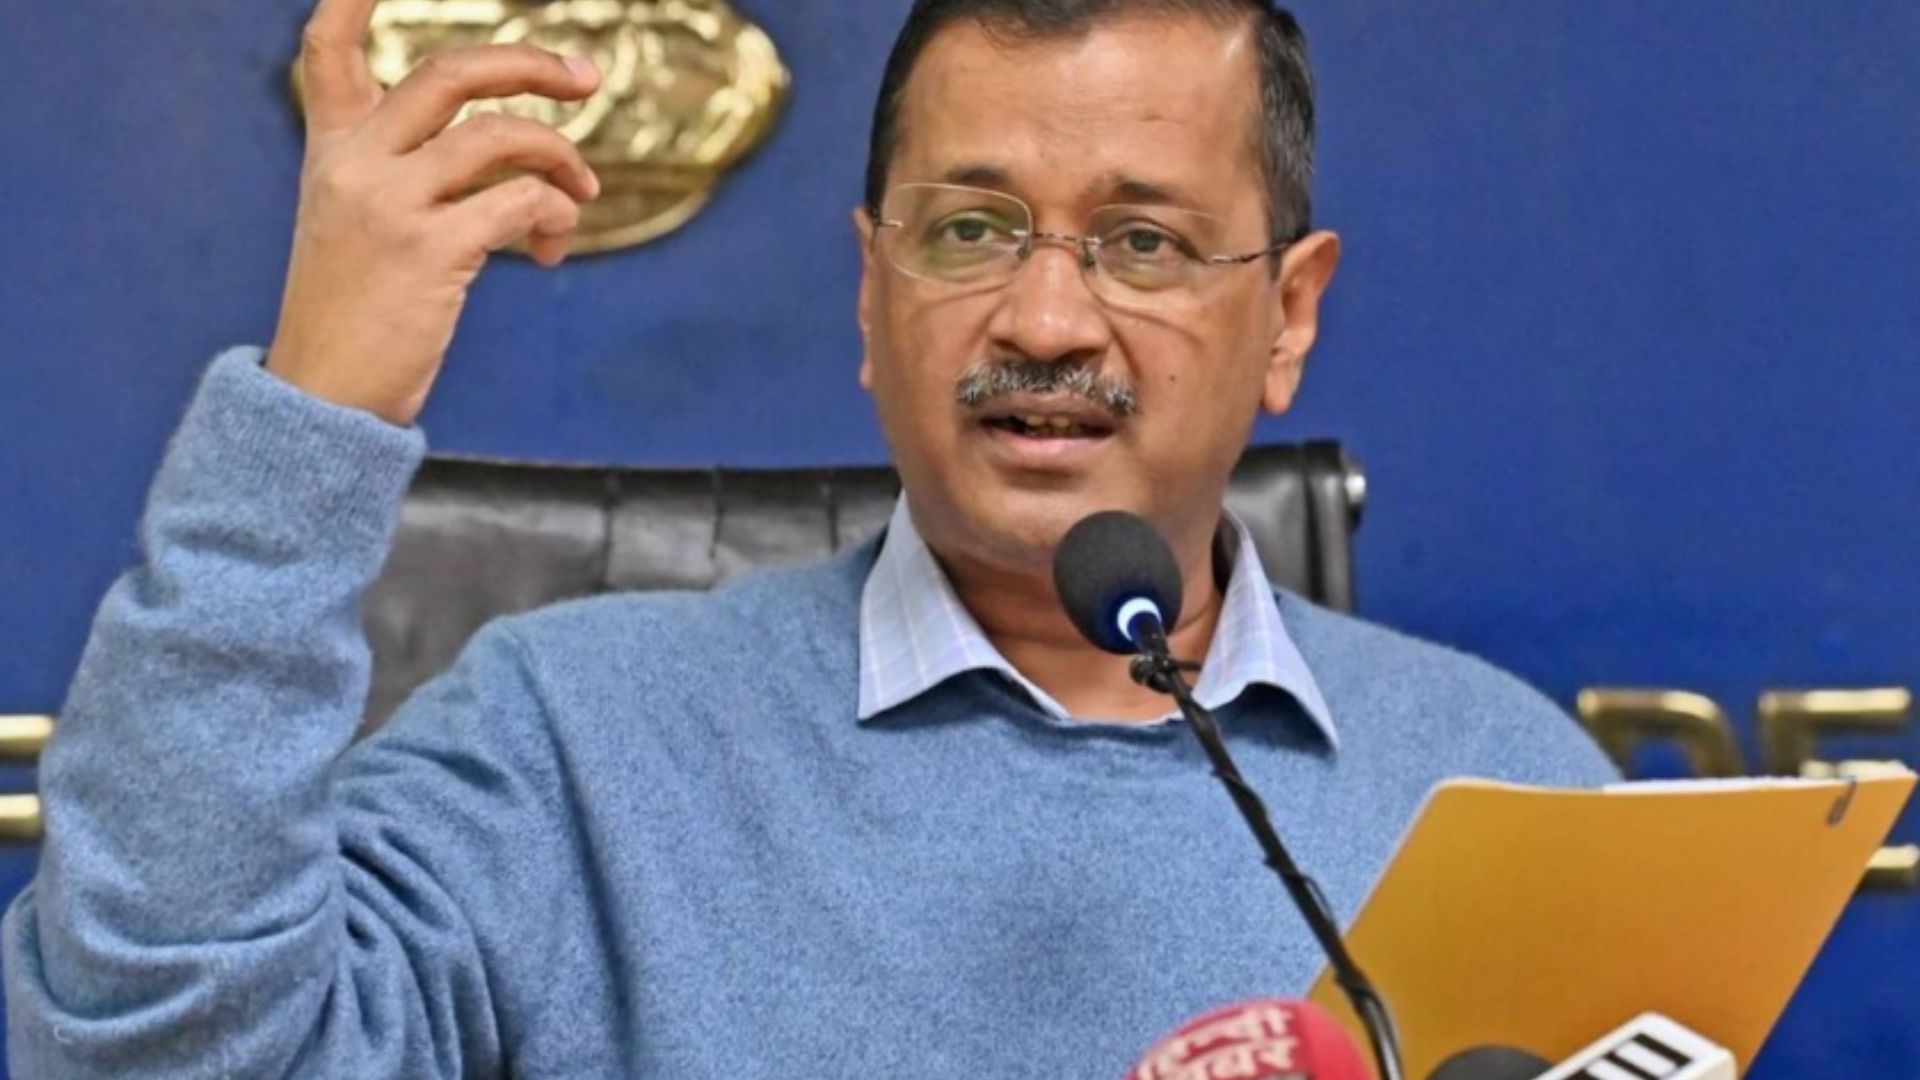 Excise Case: Delhi court takes note of ED’s complaint, issues summons to Kejriwal